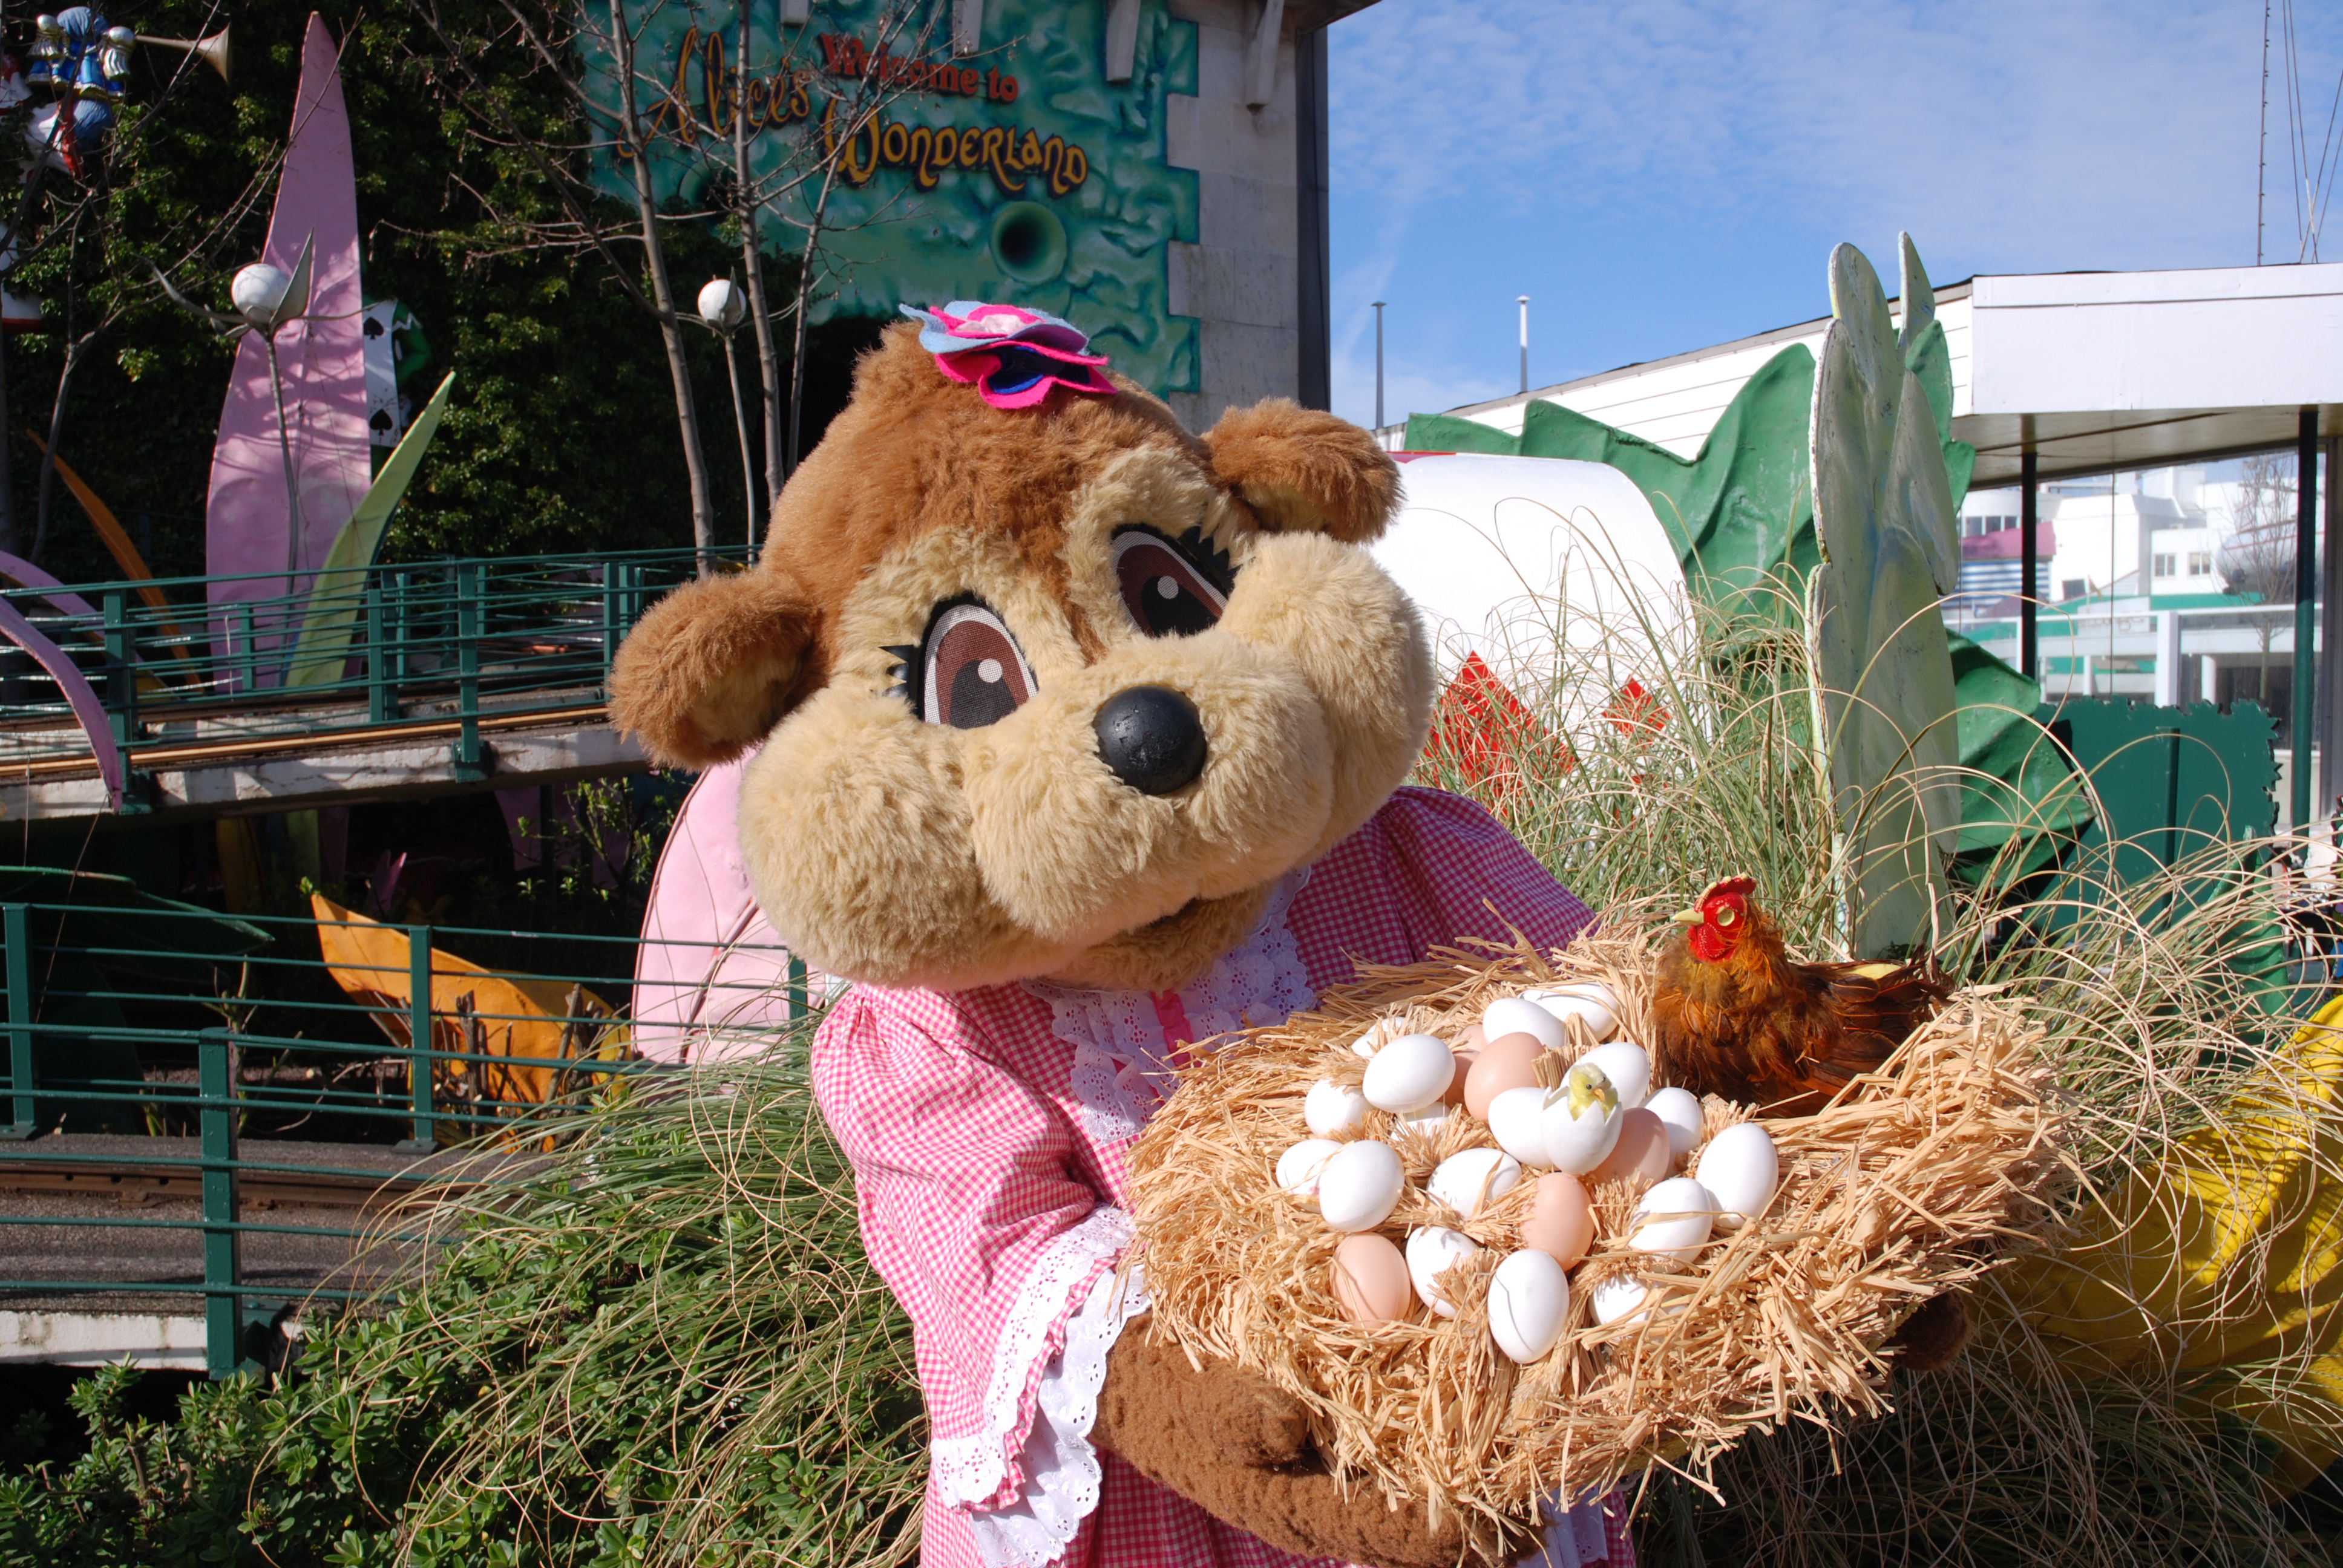 Make your Easter eggstra special at Blackpool Pleasure Beach